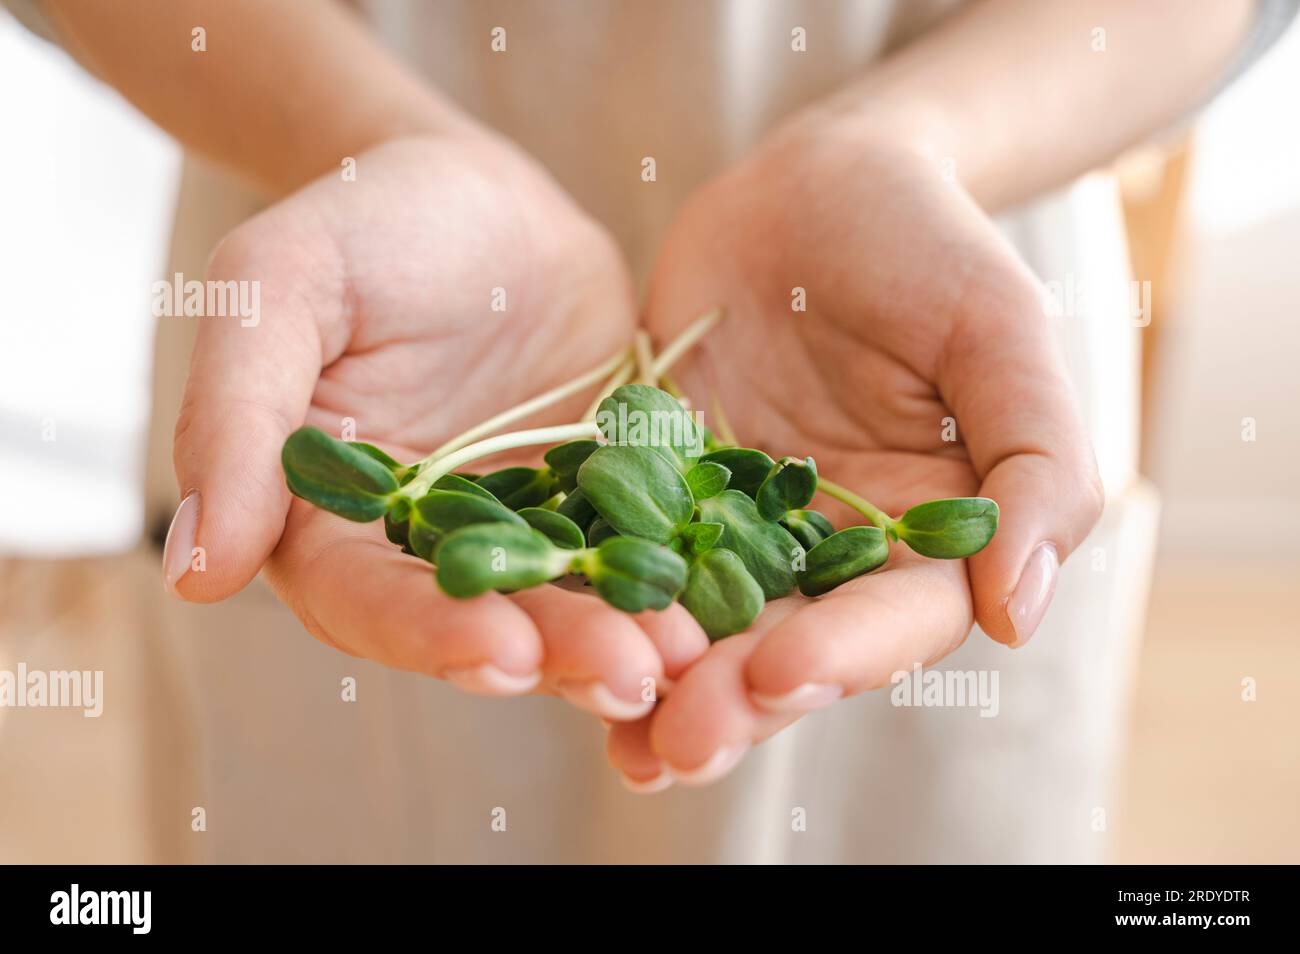 Woman holding sunflower microgreens in cupped hands Stock Photo